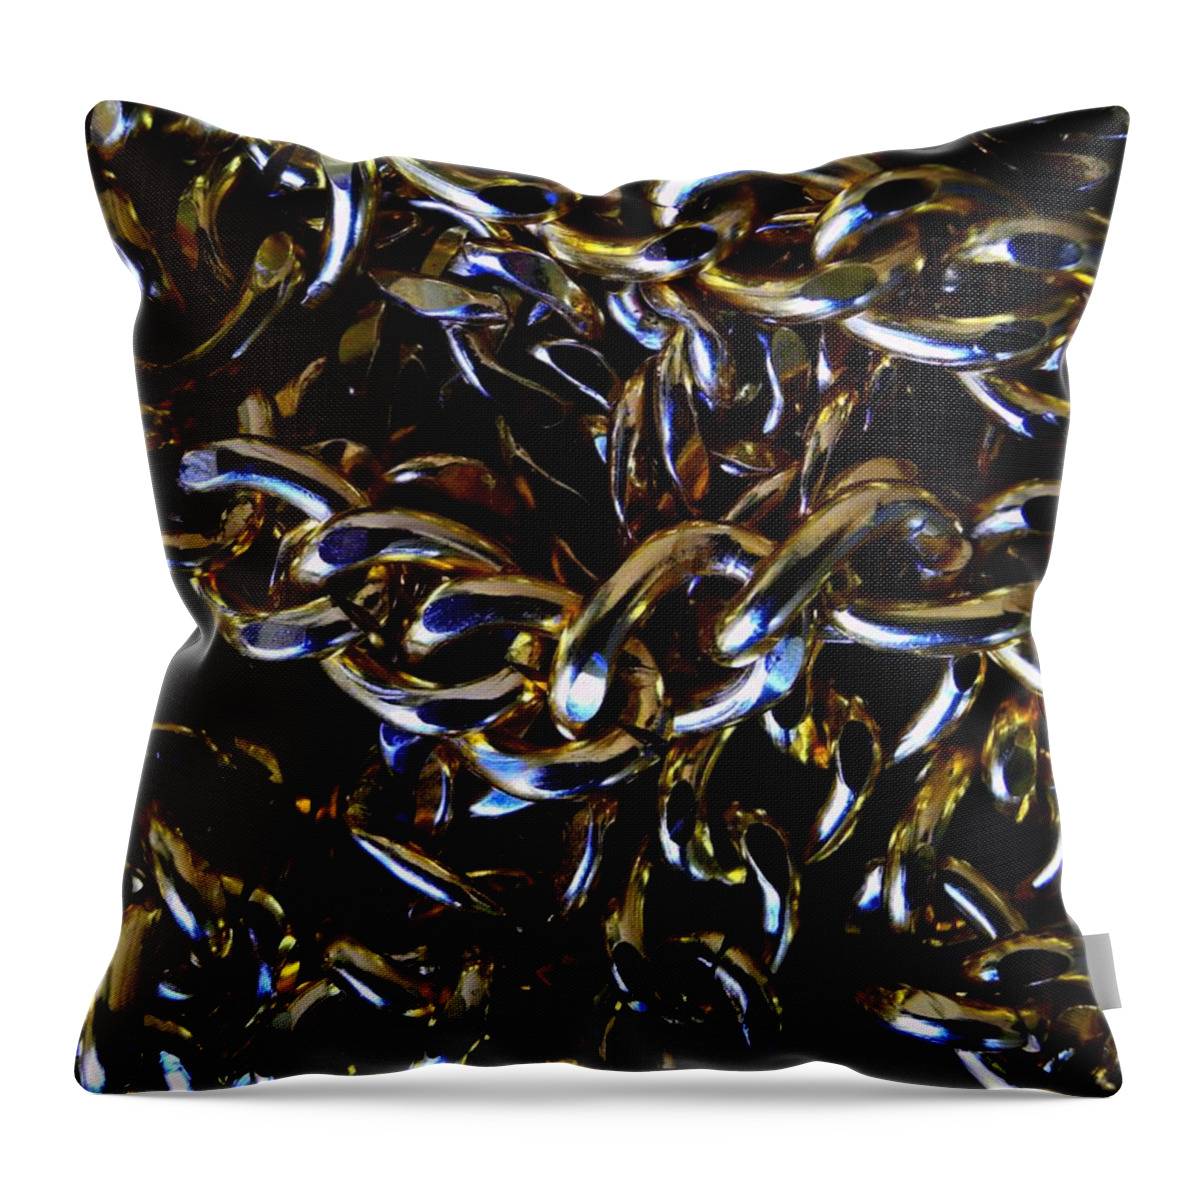 Gold Throw Pillow featuring the photograph Gold Chain 1 by Mark Blauhoefer